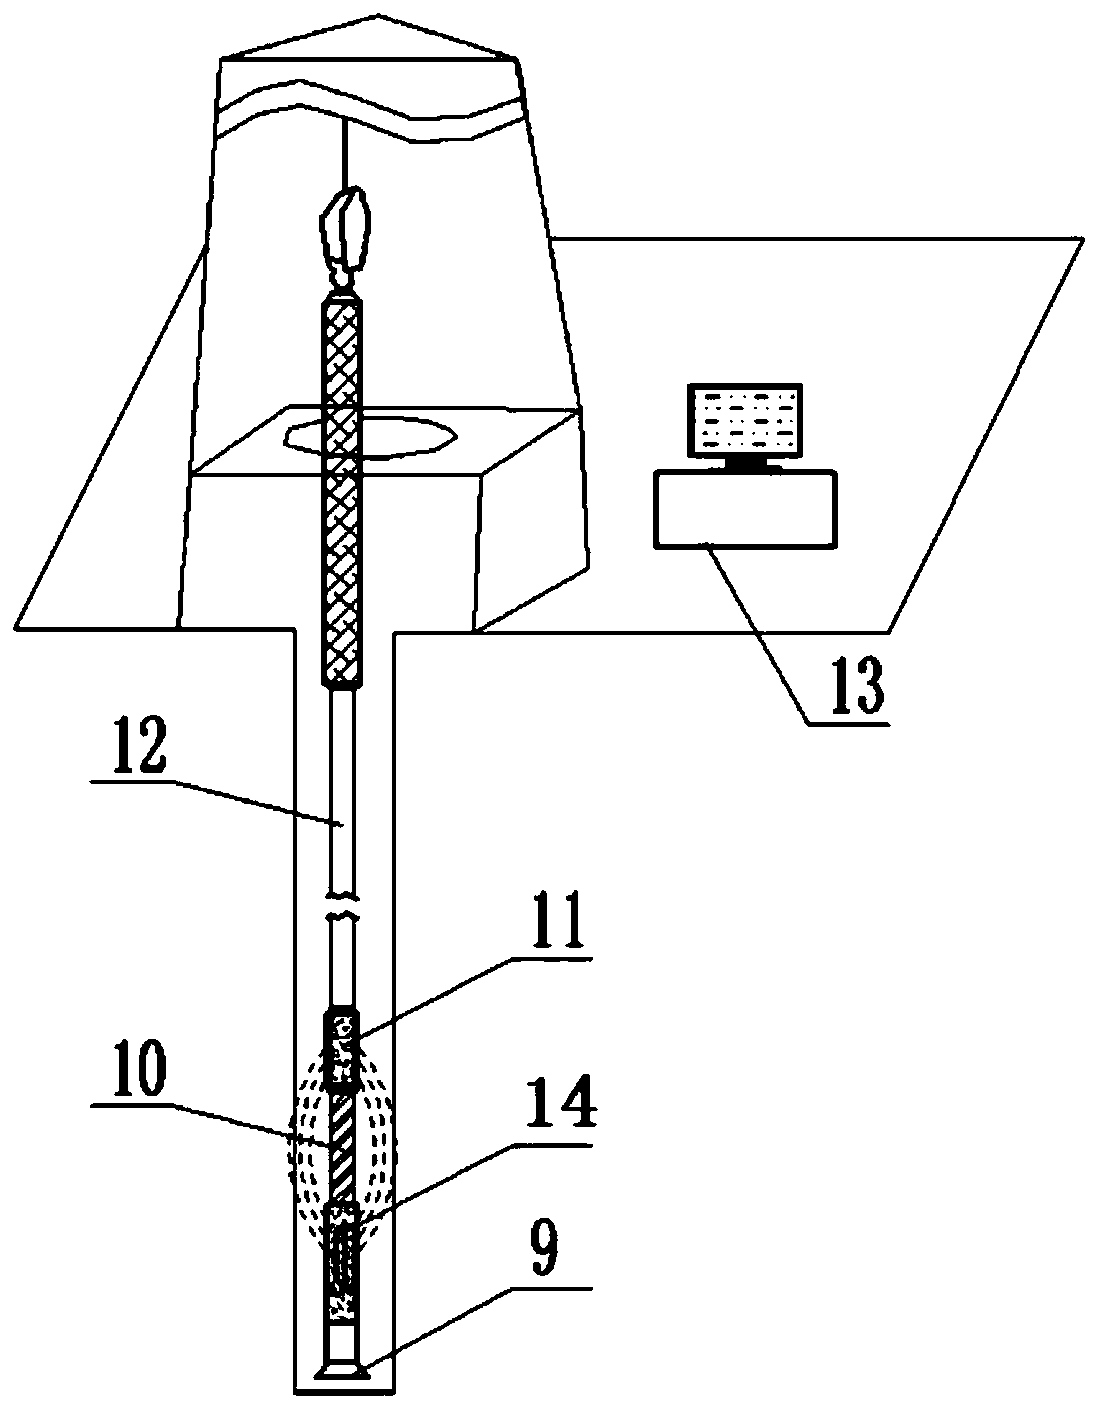 Stratum judgment and recognition method based on near-bit engineering parameters measured while drilling